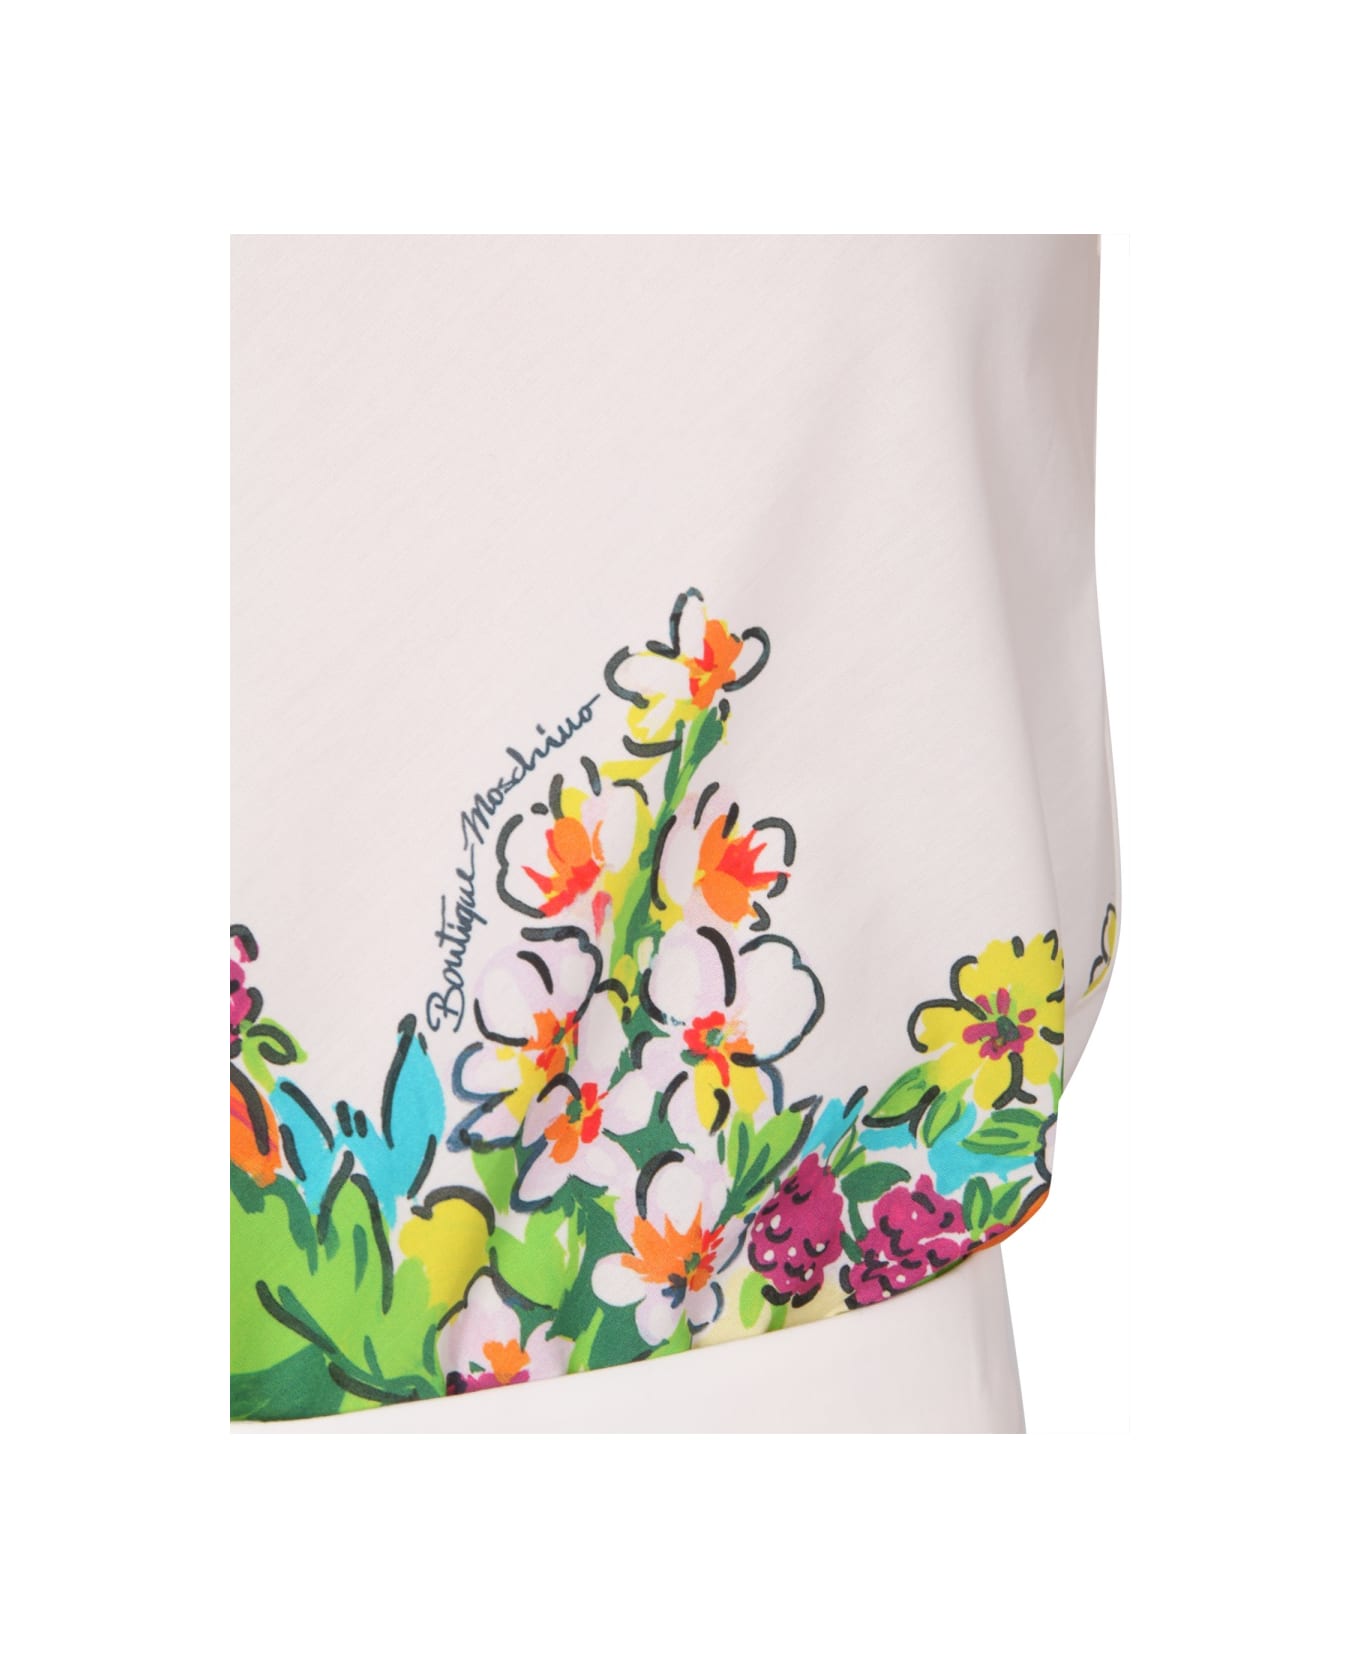 Boutique Moschino Flower And Fruit Print Top - MULTICOLOUR